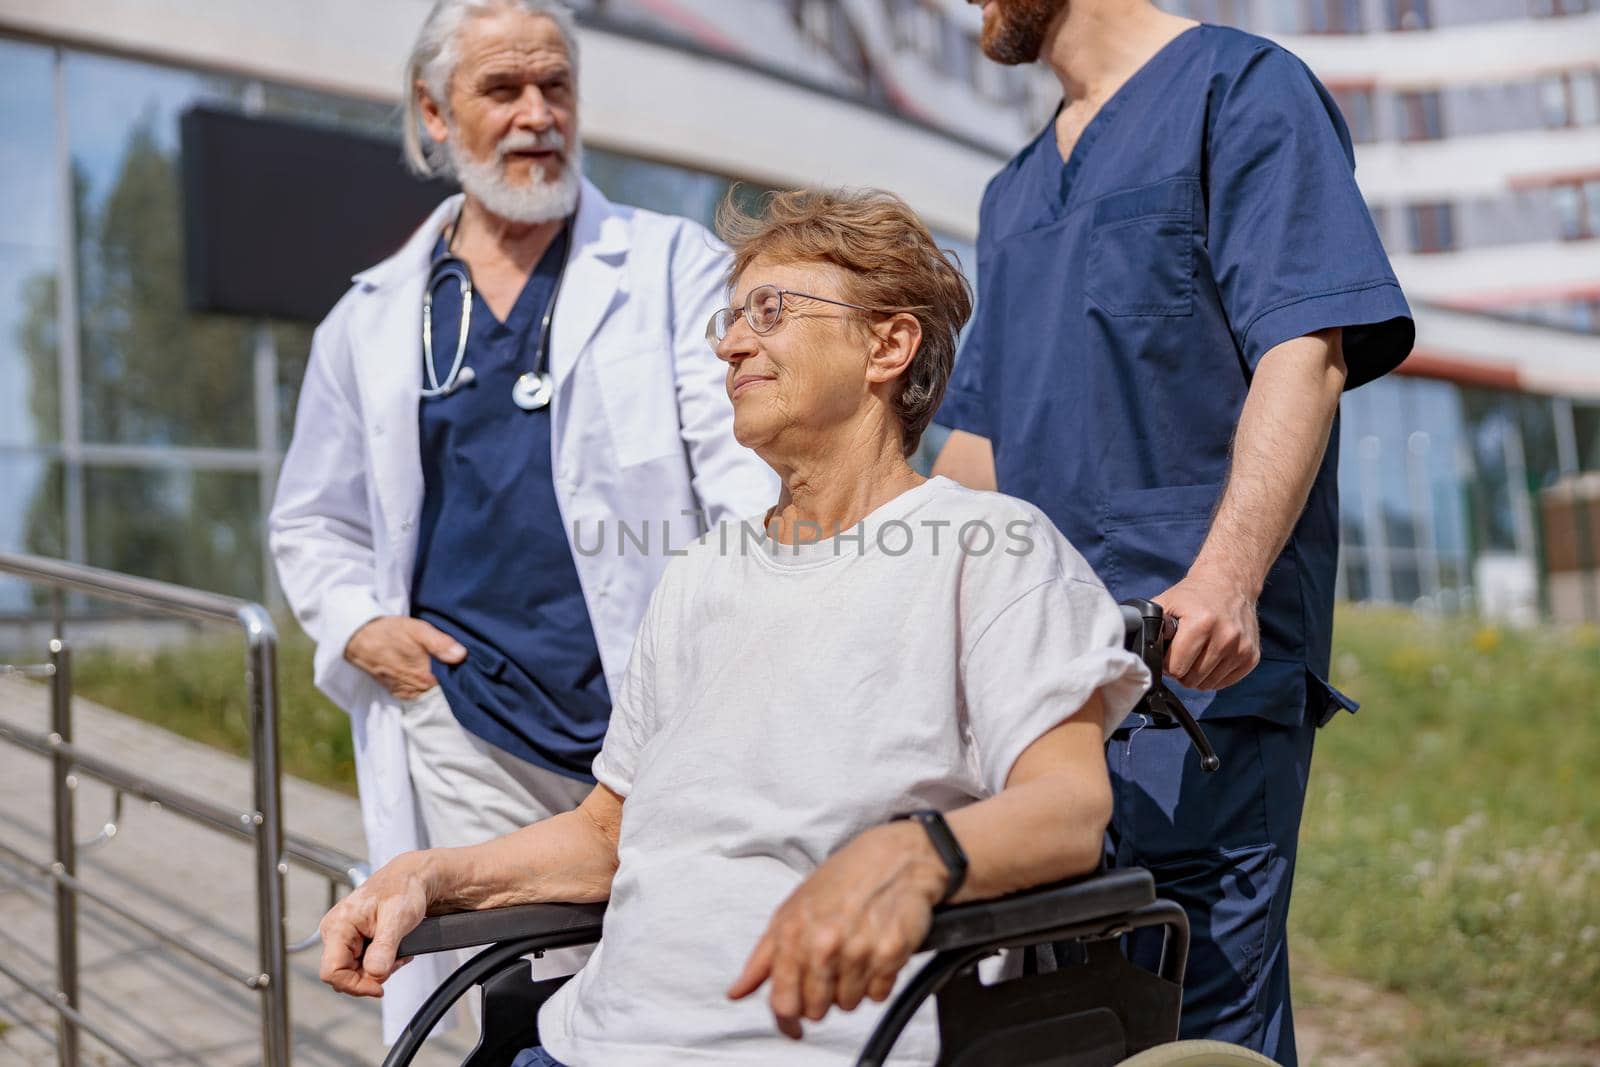 Nurse and doctor talking to patient on wheelchair in hospital yard during walk by Yaroslav_astakhov